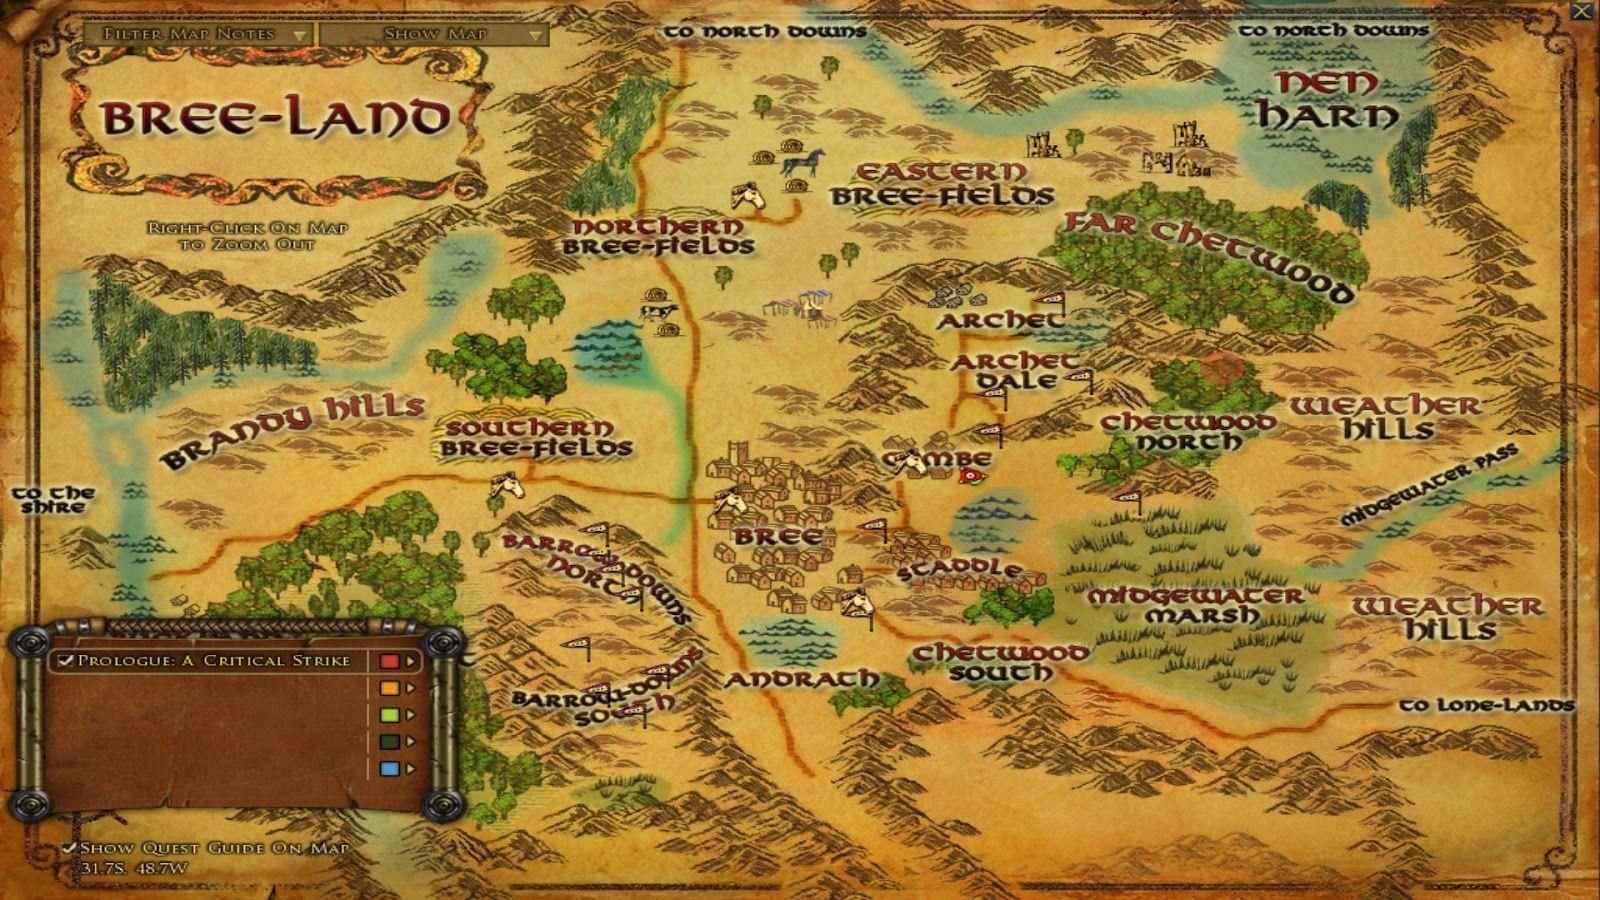 Full Map Of Lord Of The Rings Lord Map Rings Earth Middle Movies Hd Wallpapers The Art Of Images